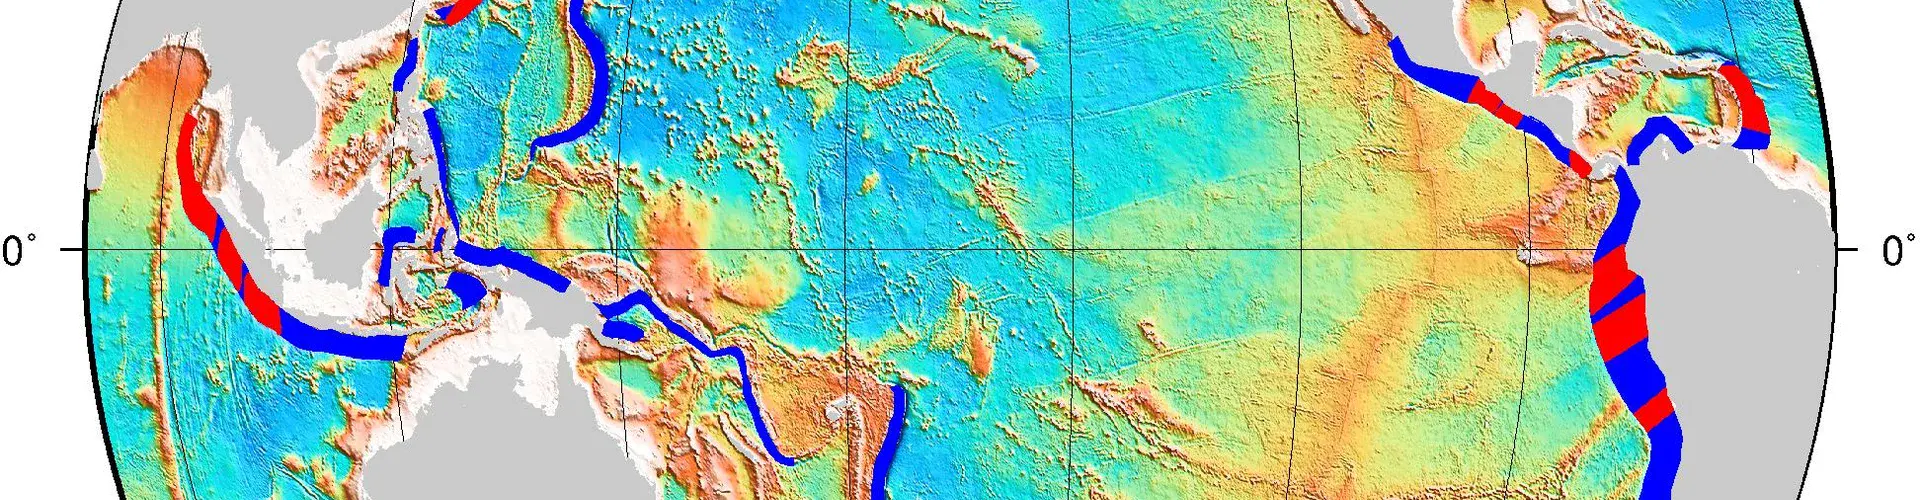 Red marks the hotspots: strong earthquakes occur more often where cracks on the seafloor overlap subduction zones (in blue). (Credit: Müller and Landgrebe)